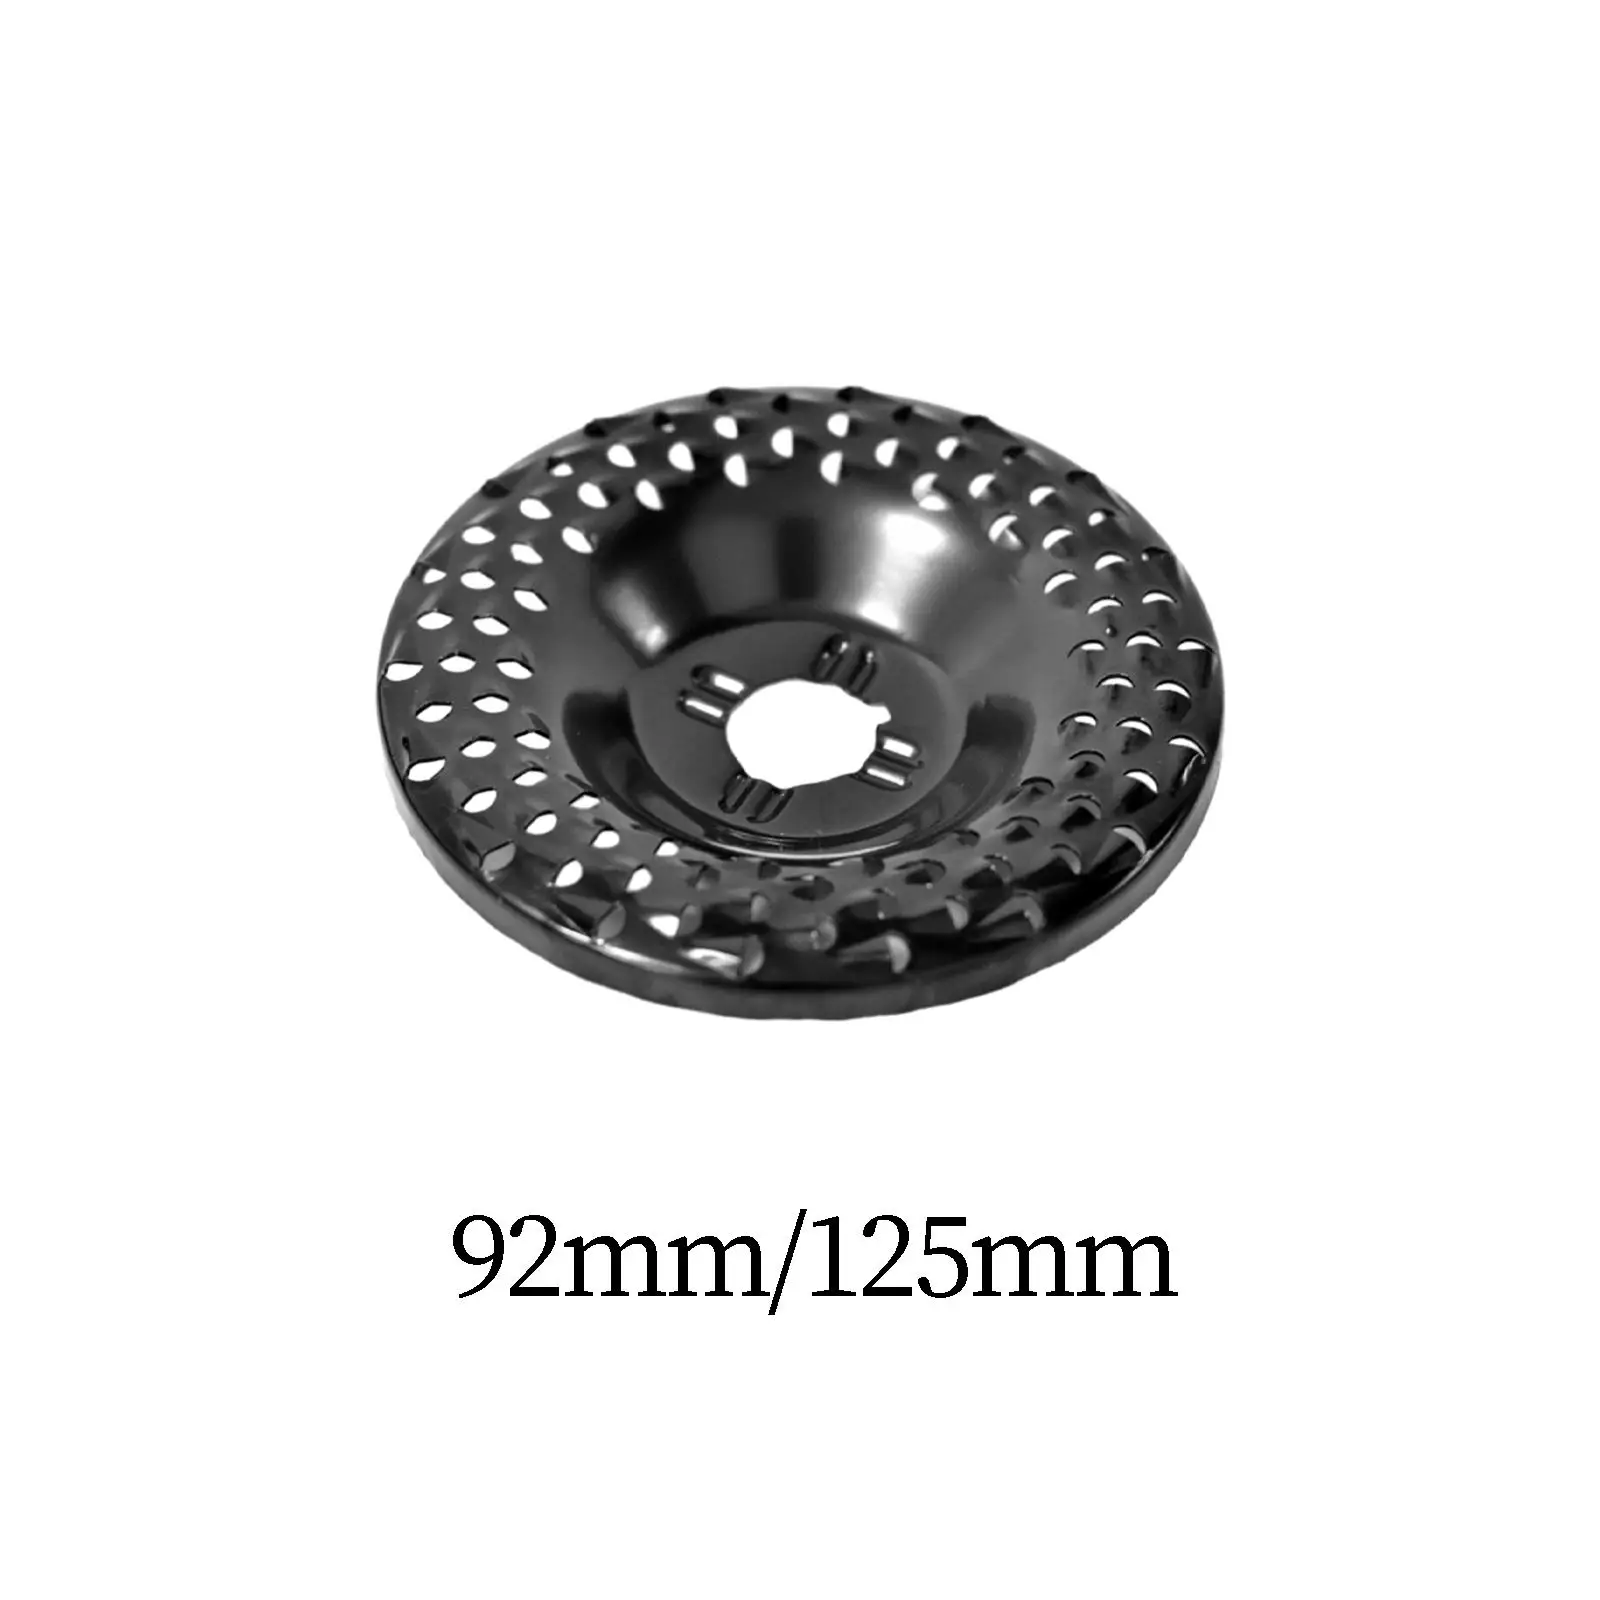 Grinder Wheel Disc Attachments Angle Grinding Dish Wood Cutting Sturdy Sanding Carving for Angle Grinders Carving Cutting Disc